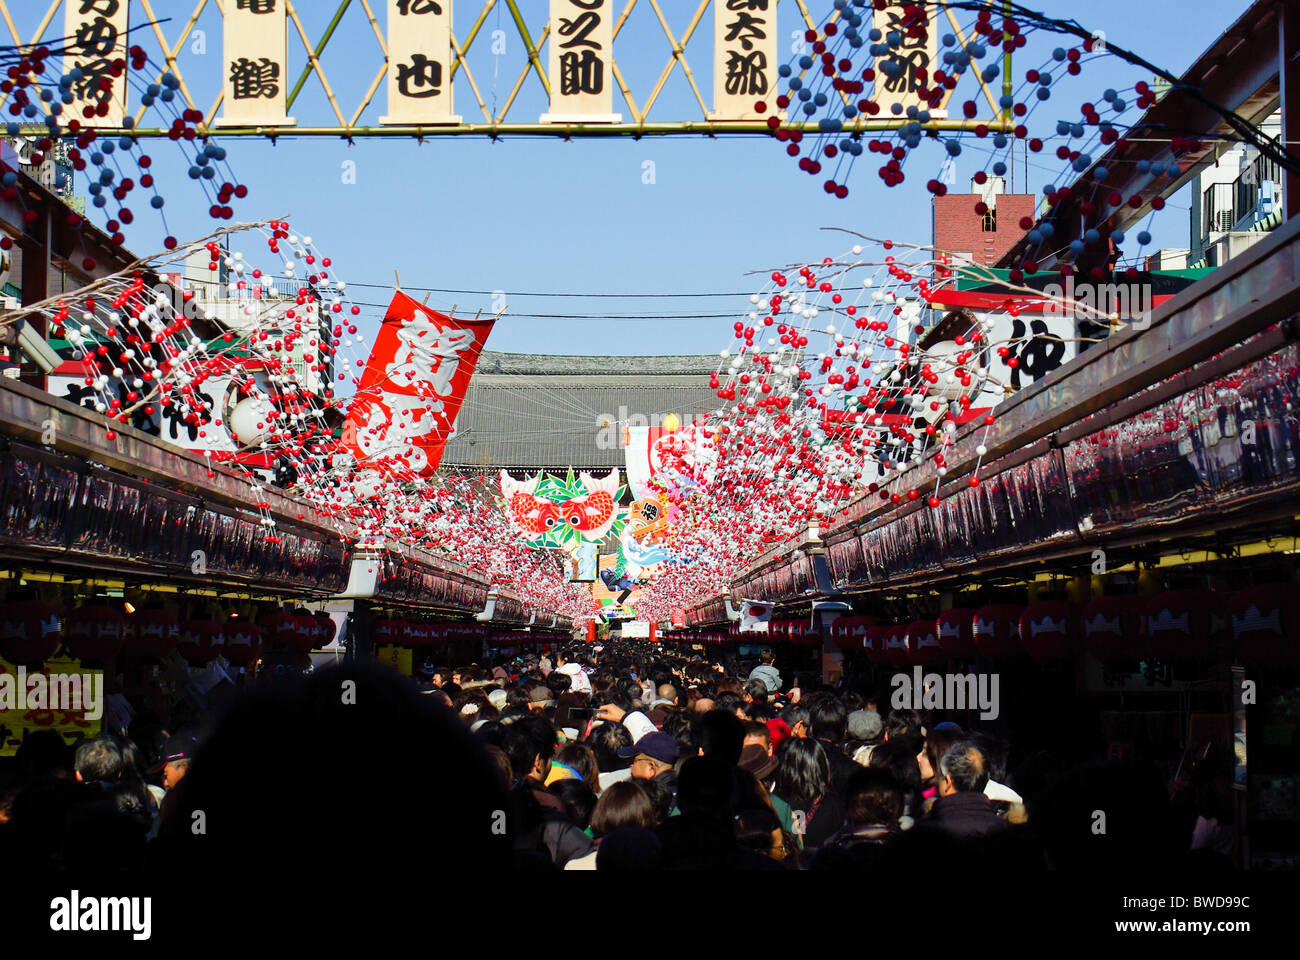 Nakamise Outdoor Market in Asakusa leadig to Sensoji Temple packed with people during New Years Celebrations Stock Photo